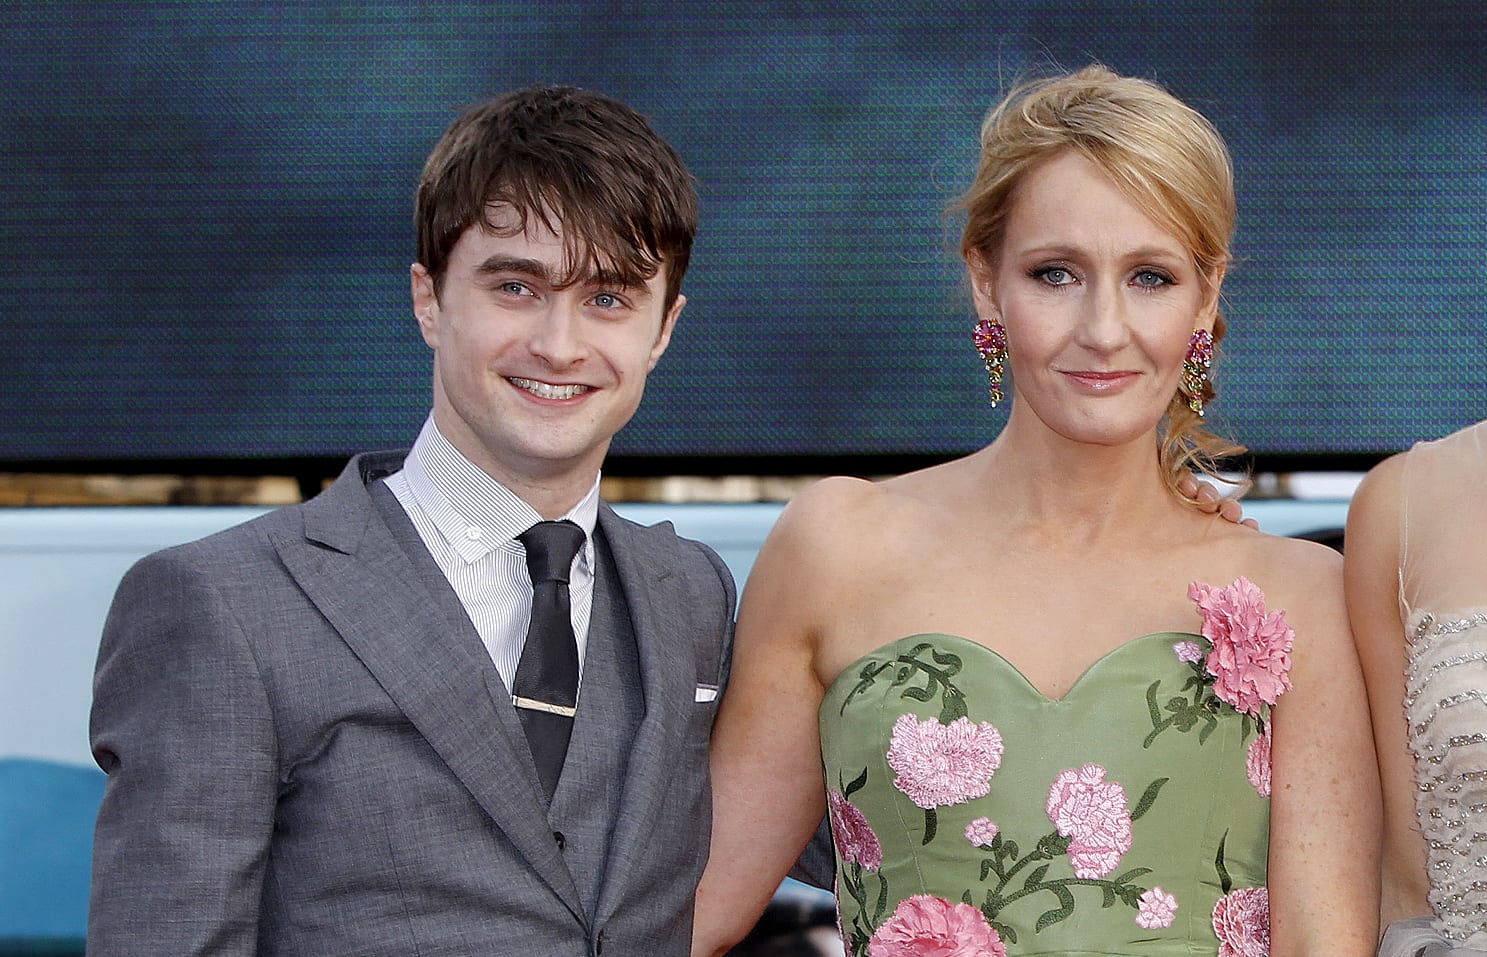 Transgender women are women': Daniel Radcliffe clashes with J.K. Rowling